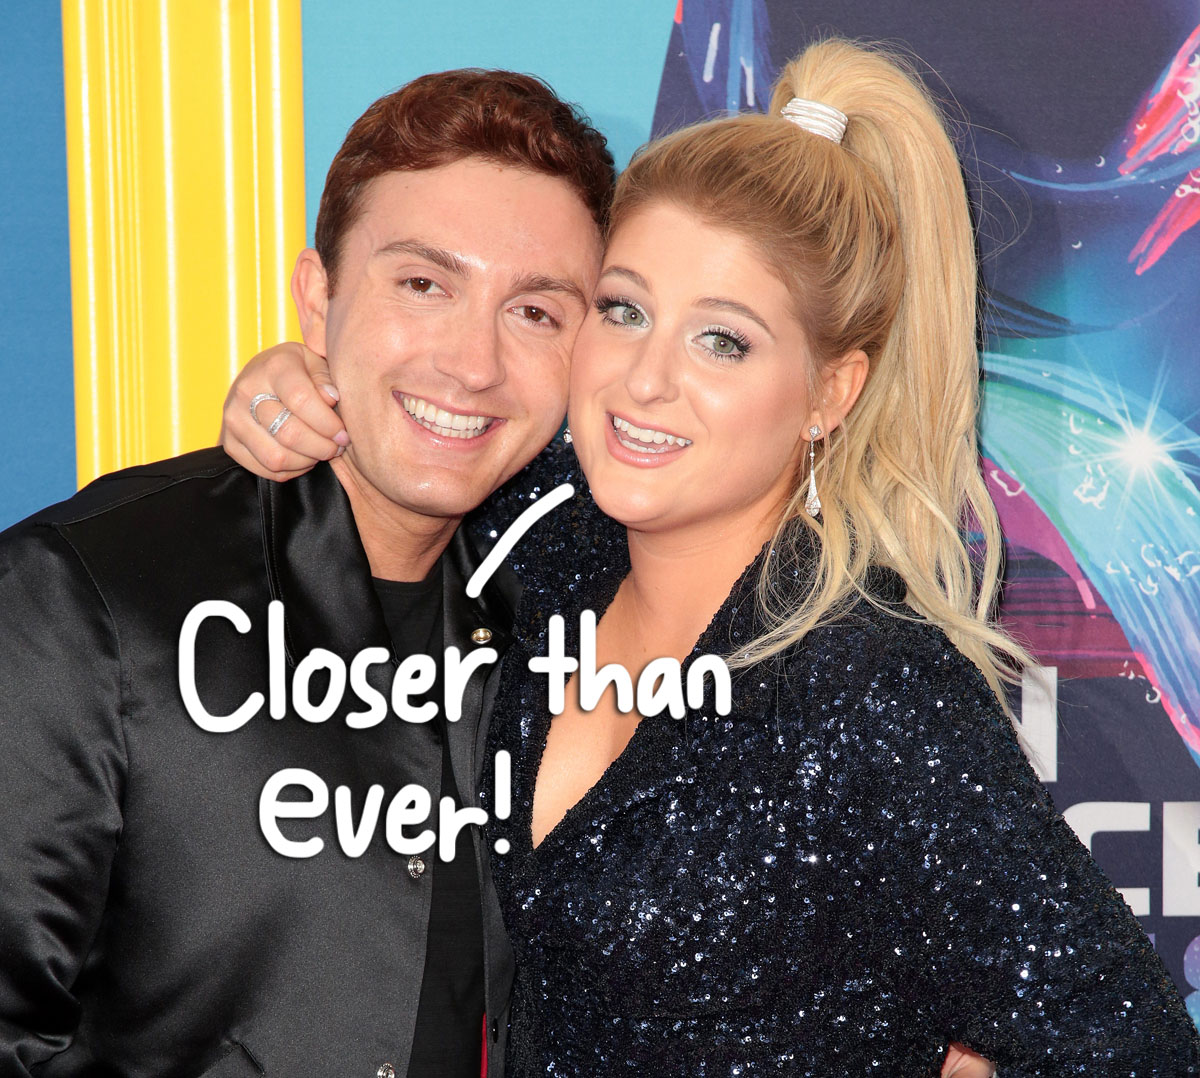 Meghan Trainor Says She and Husband Have 2 Toilets Next to Each Other